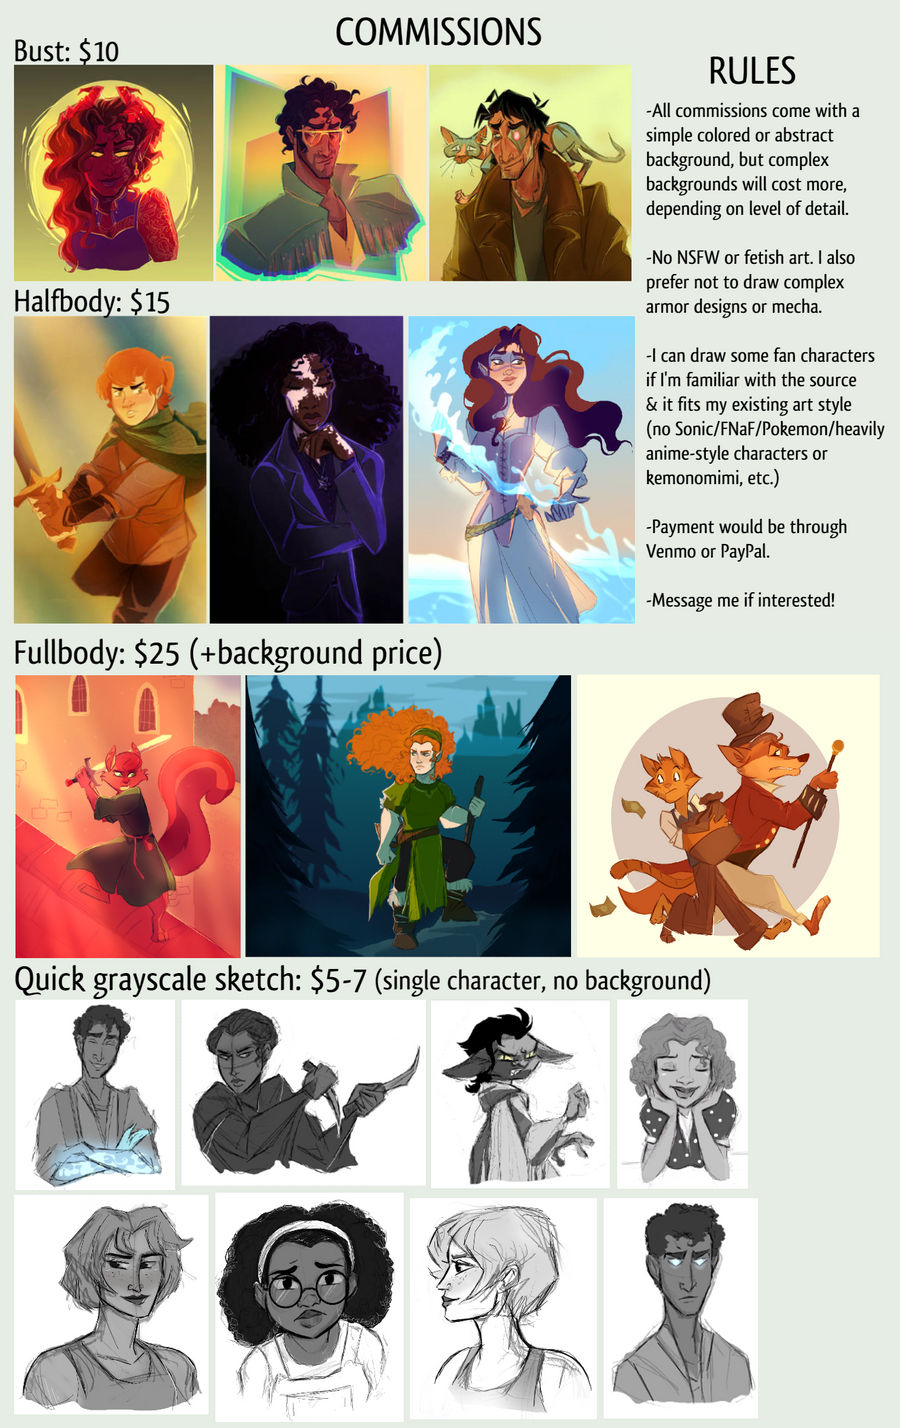 FOR HIRE] October commissions OPEN (3 slots) : r/artcommissions